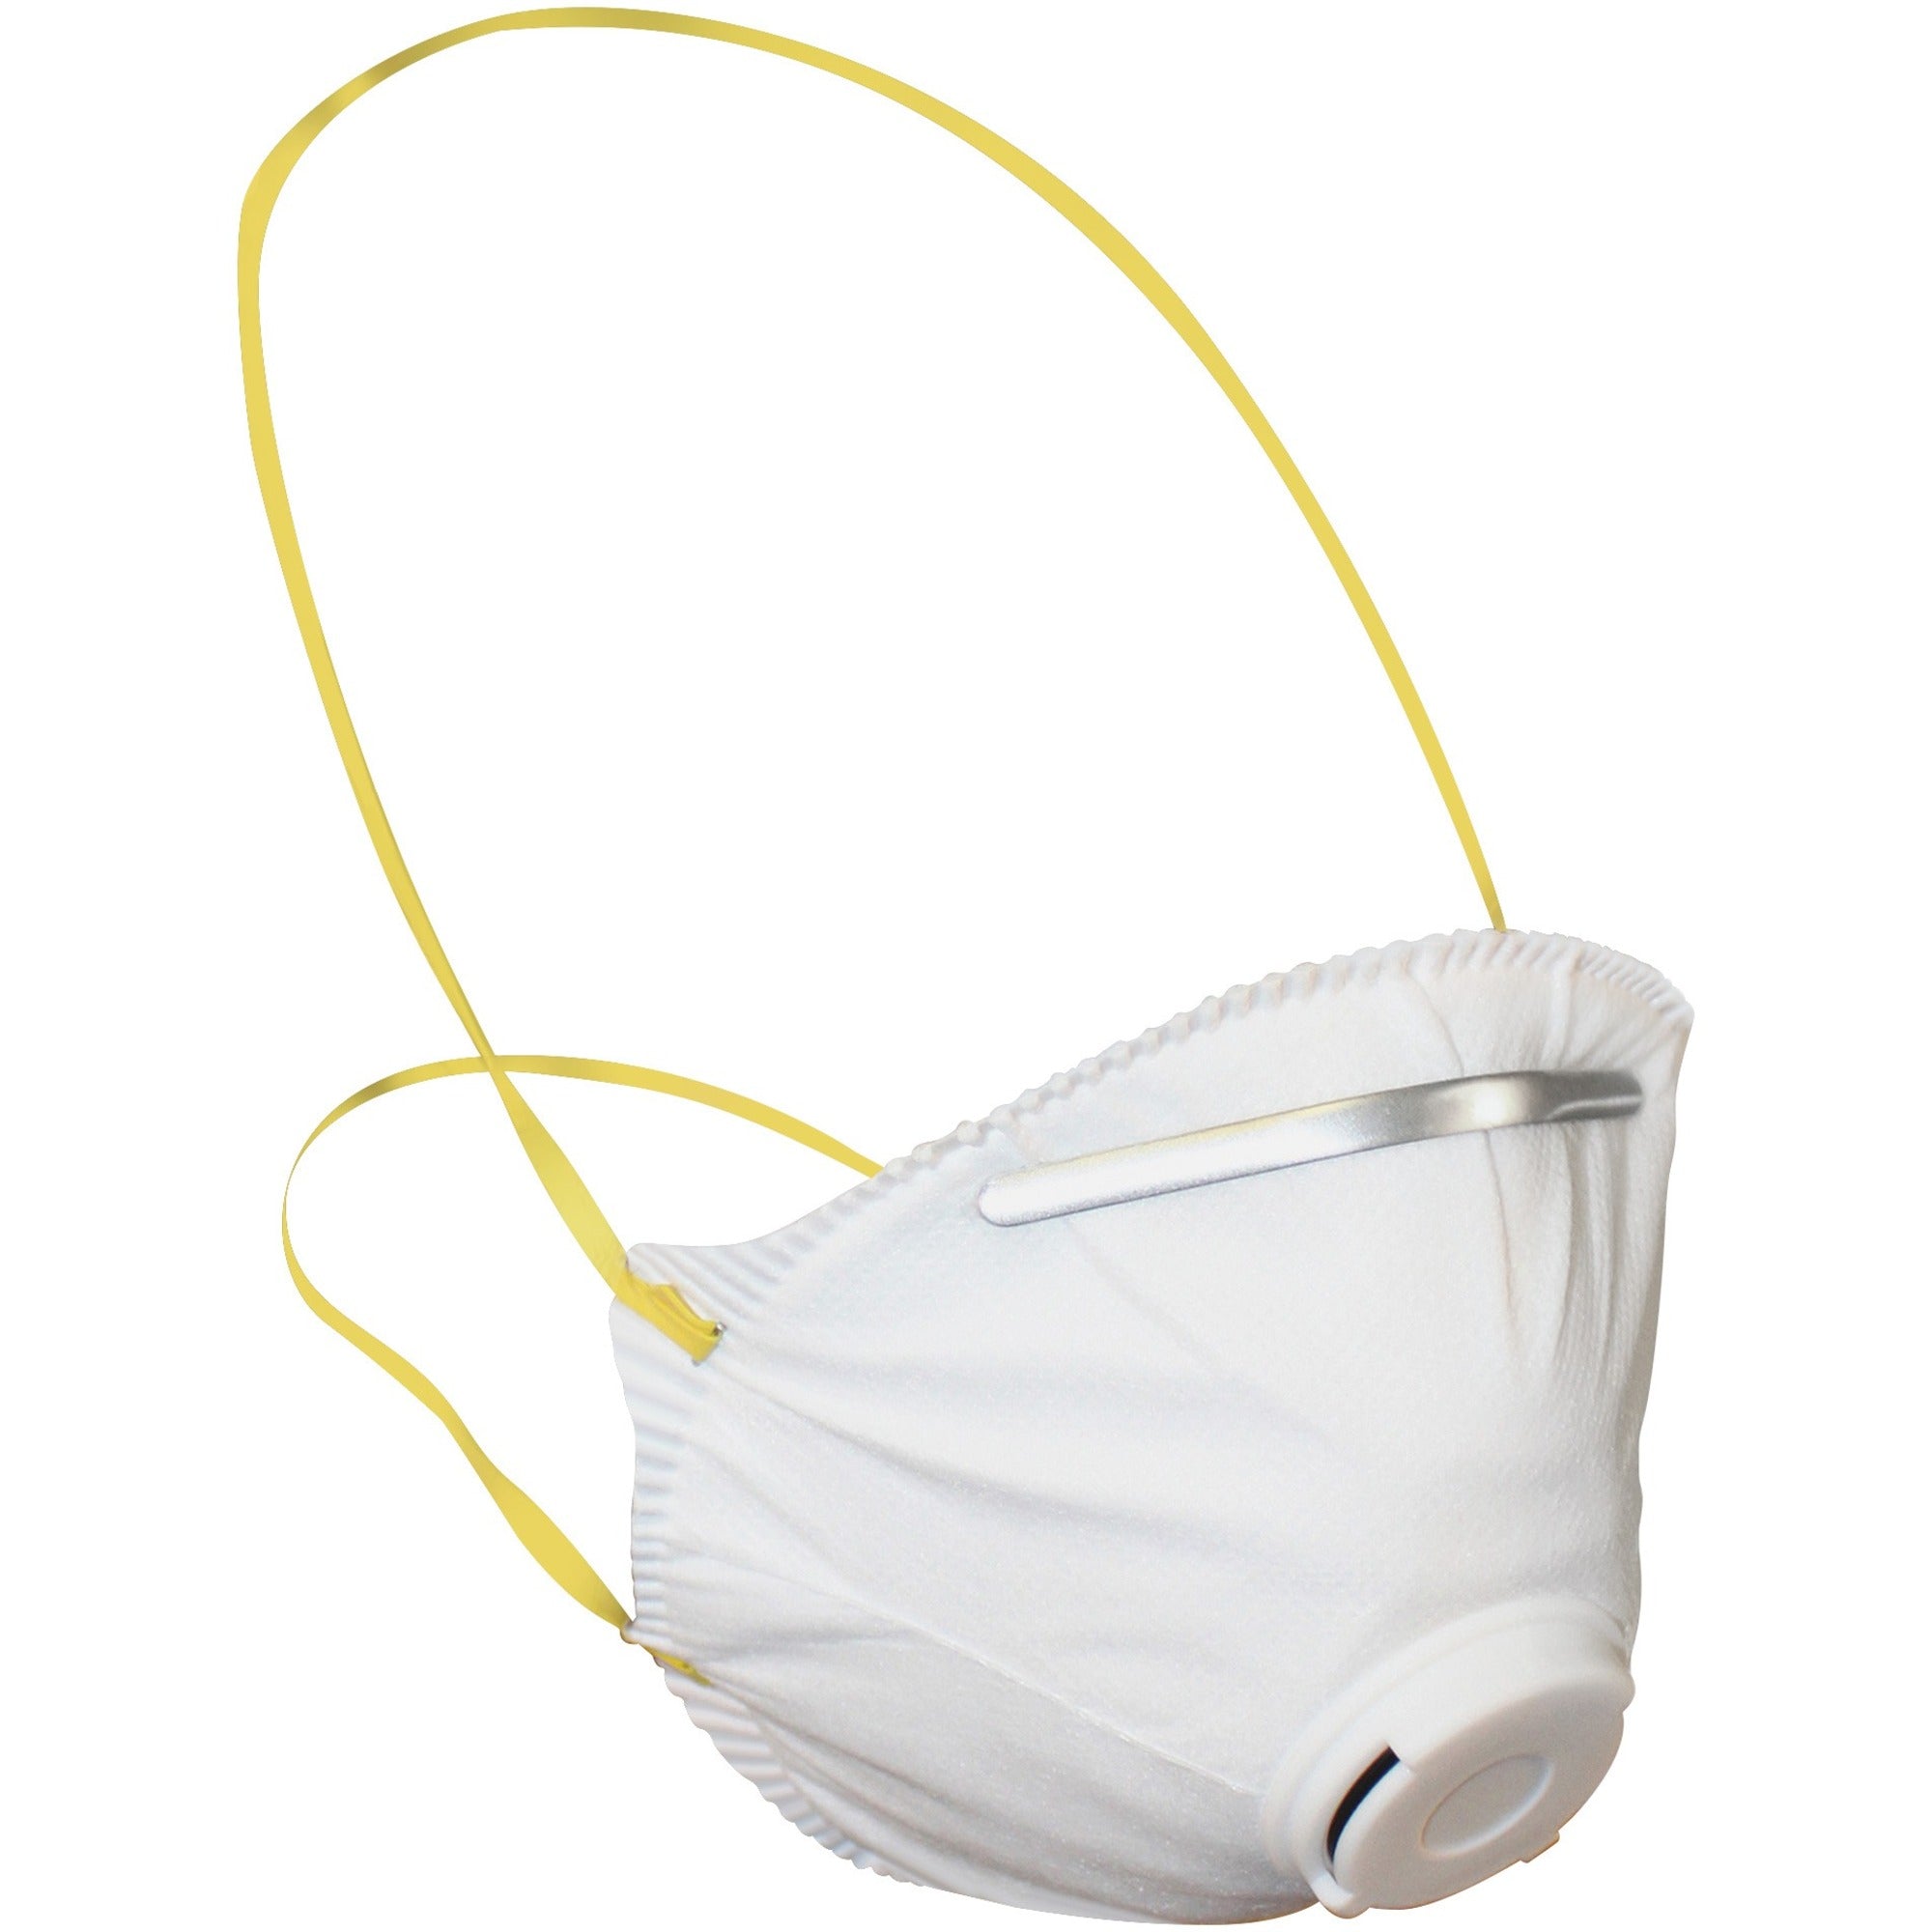 proguard-particulate-respirators-w-exhalation-valve-universal-size-respiratory-dust-pollen-mist-grass-flying-particle-respiratory-protection-white-comfortable-adjustable-nose-piece-disposable-comfortable-disposable-12-carton_pgd7314bct - 1